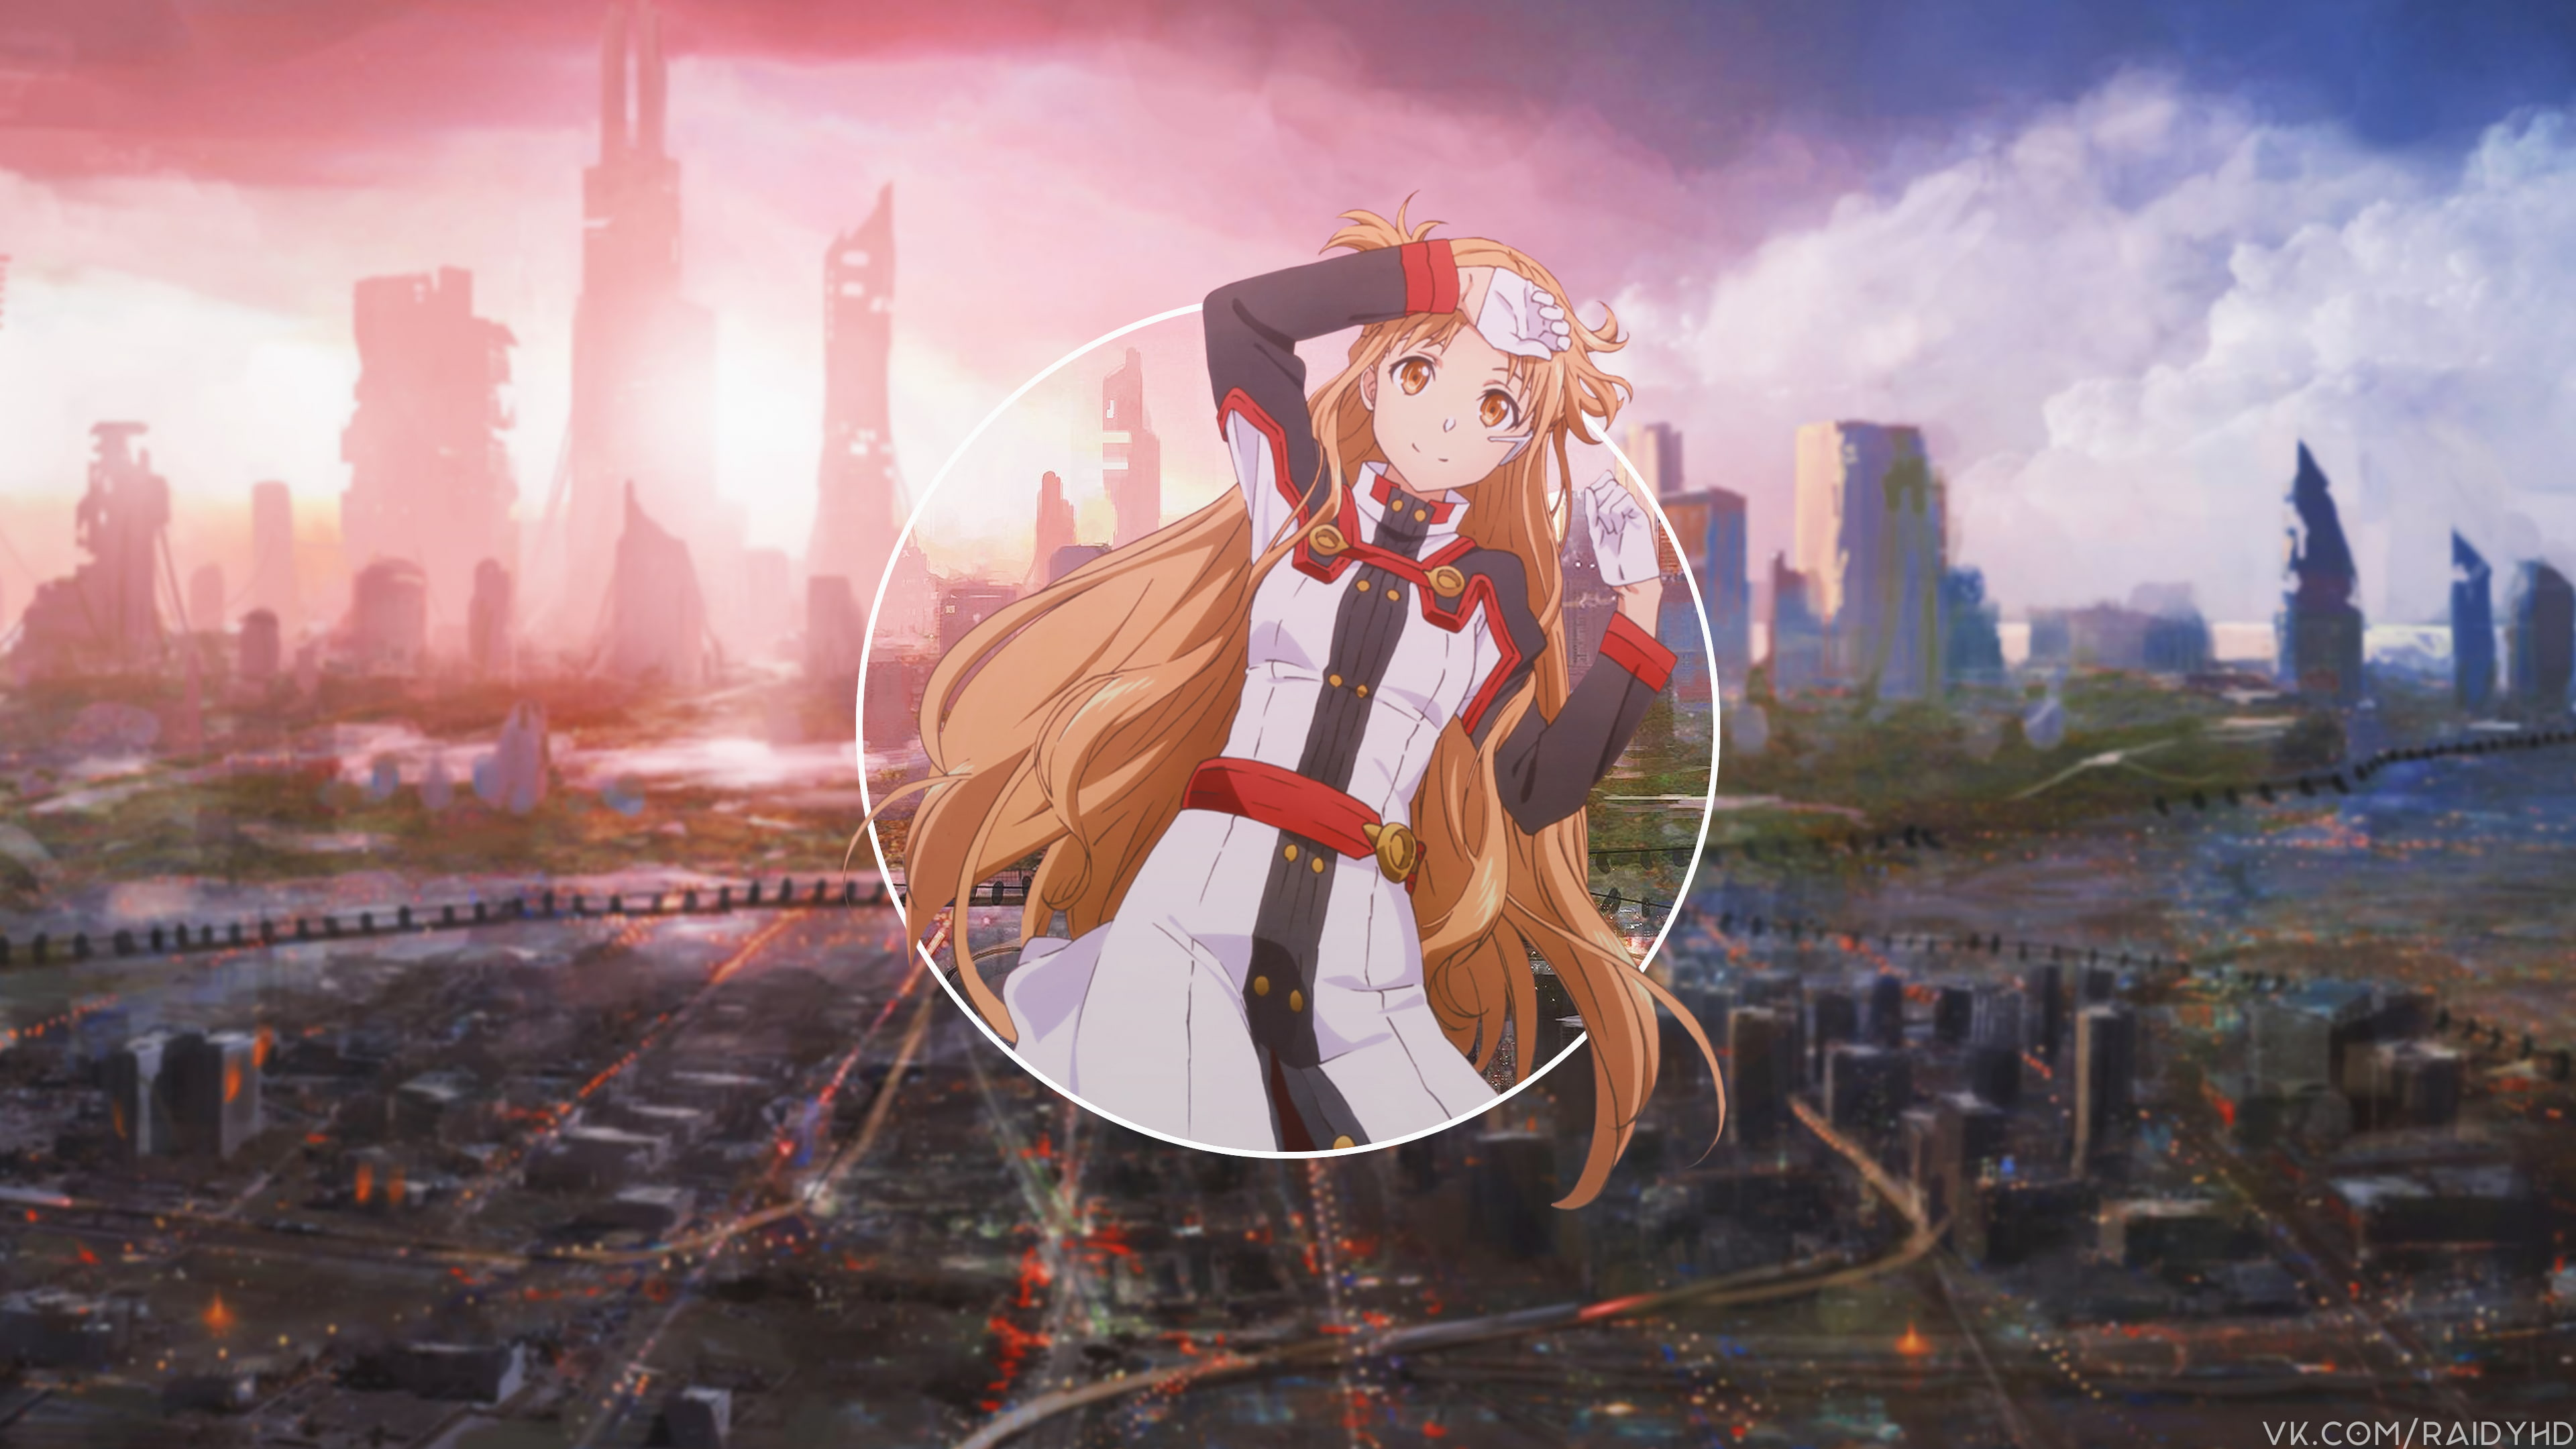 anime, anime girls, picture-in-picture, Sword Art Online, Yuuki Asuna